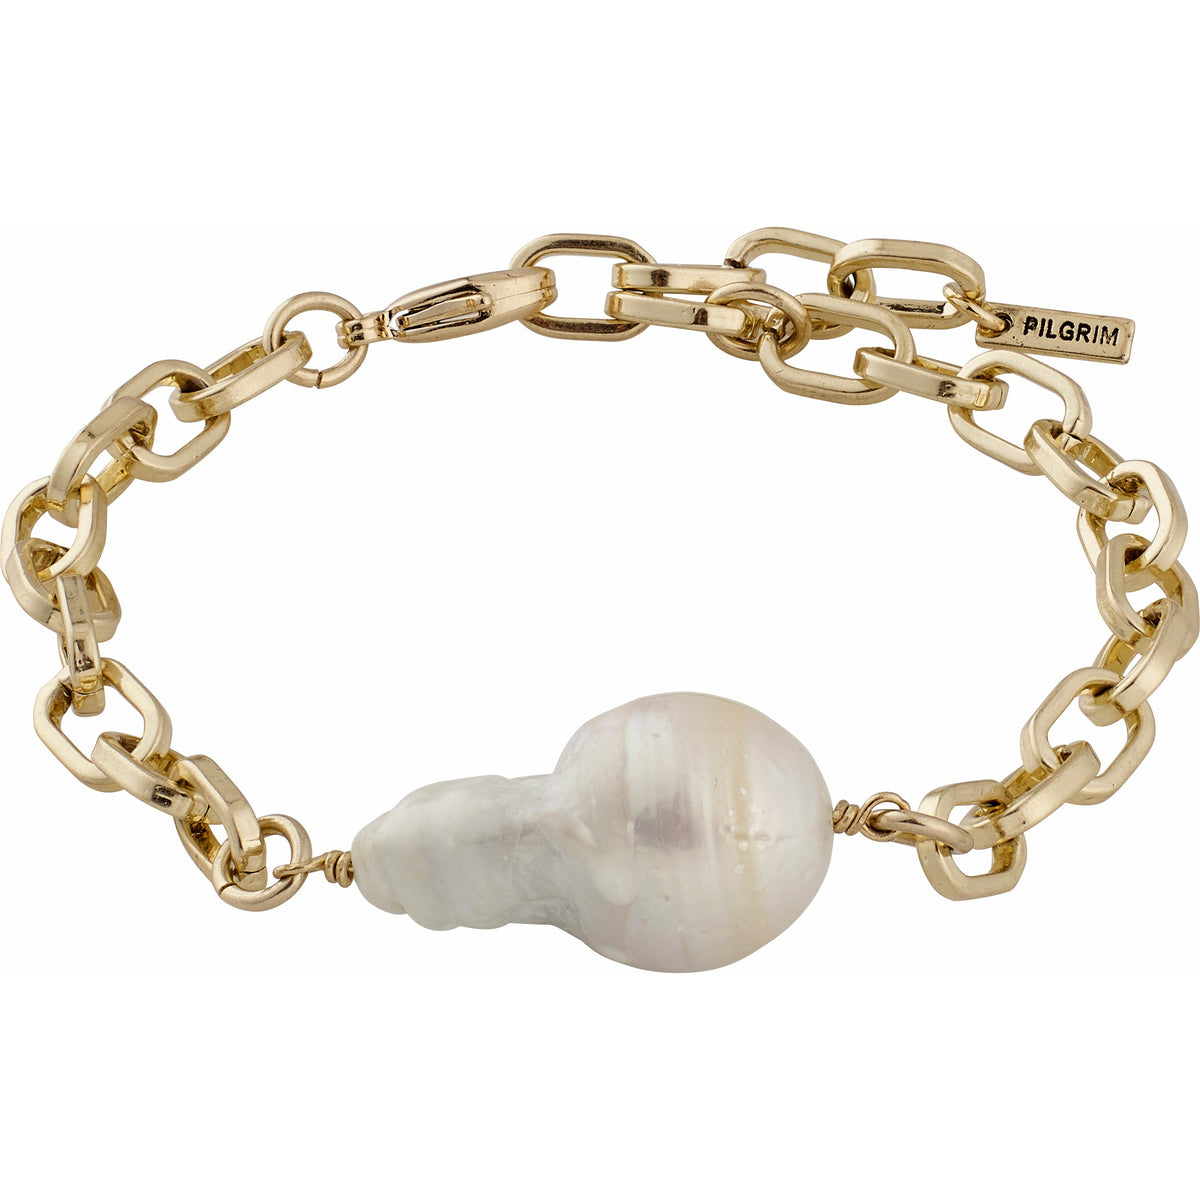 A large freshwater pearl is the focus in this elegant cable link chain bracelet, oozing Nordic coolness and timeless elegance. From the gracefulness collection, these pearls represent poise and inner calm with their soft colour and shape. Polished finish. Handmade with heart.  Danish design.  Safe for sensitive skin.  Gold  plated.  More information: - Length measures 16cm